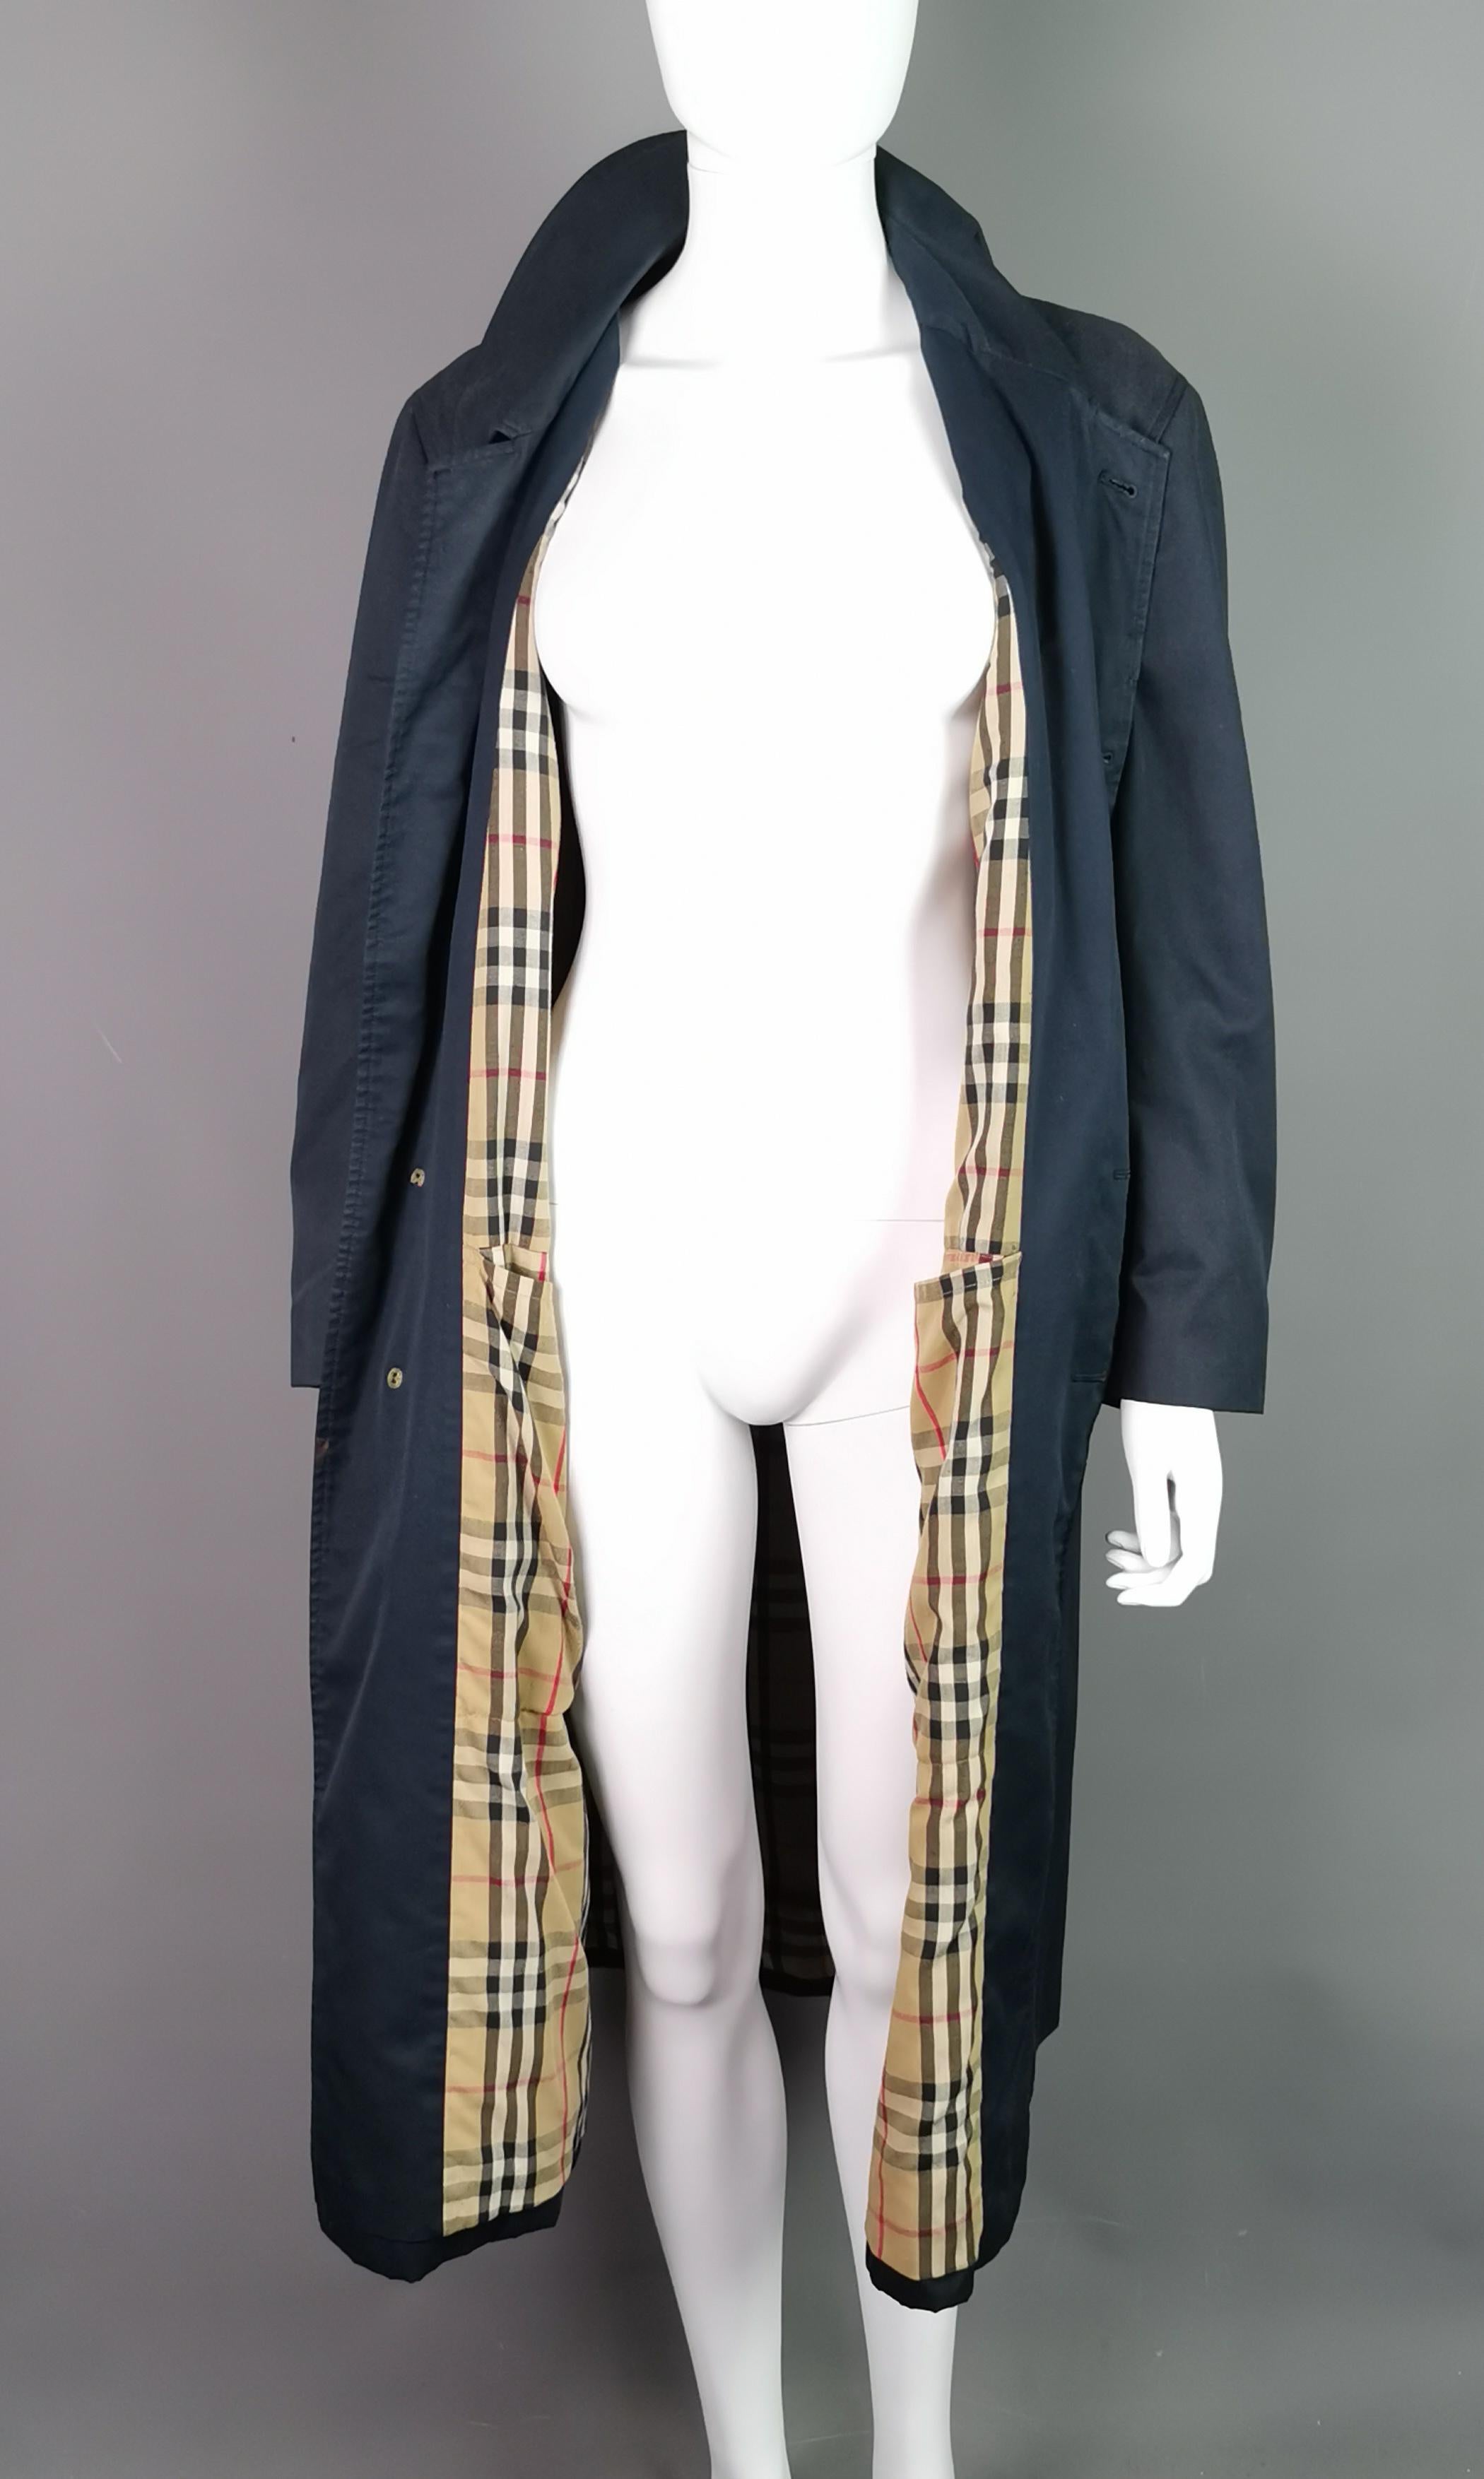 A stylish and iconic vintage Burberry mens trench coat or mac.

This is a beltless trench coat, navy blue with a classic Burberry Nova check lining.

It fastens with a concealed plastic button fastening.

Labelled Burberrys a classic and iconic